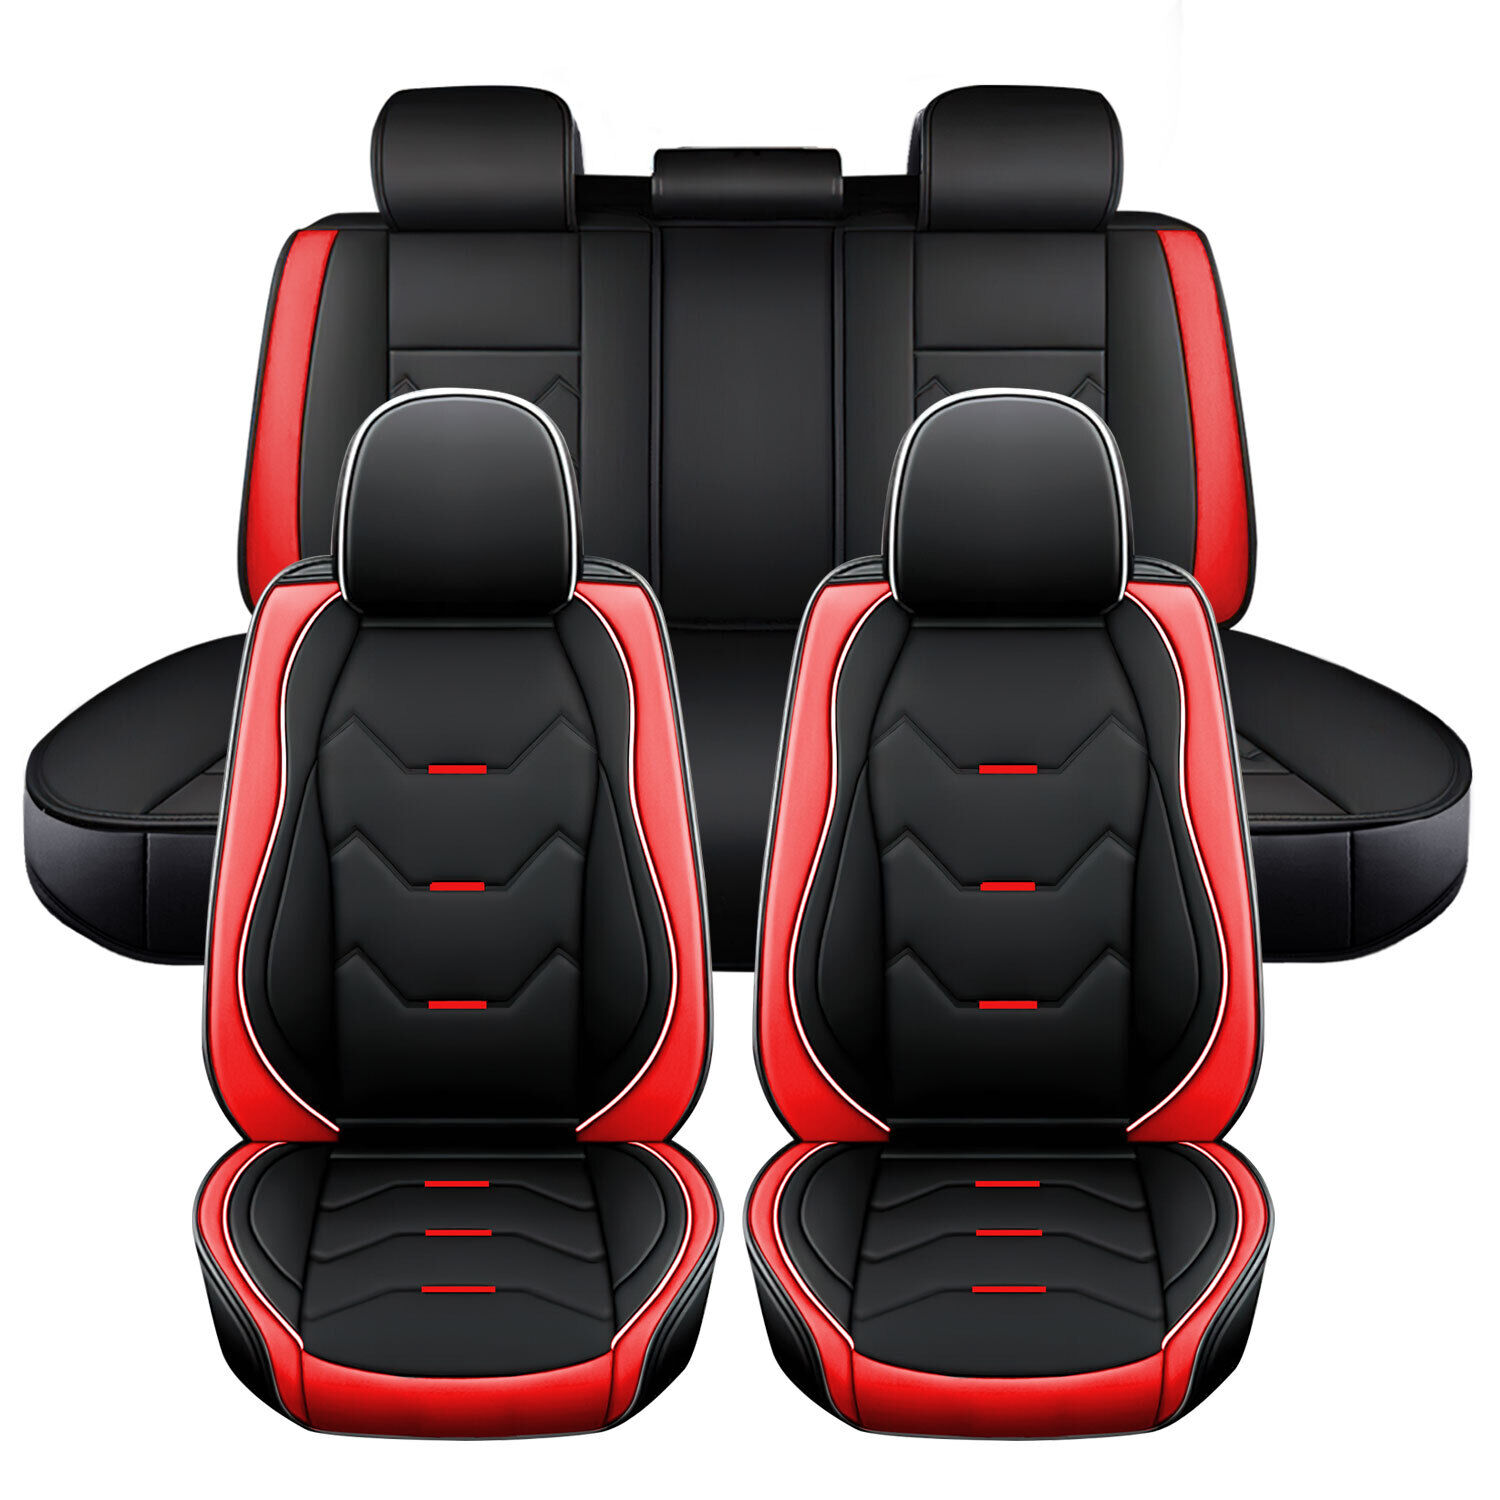 5 Seat Full Set Car Seat Covers Leather For Infiniti FX35 FX45 M35 G35 G37 EX35